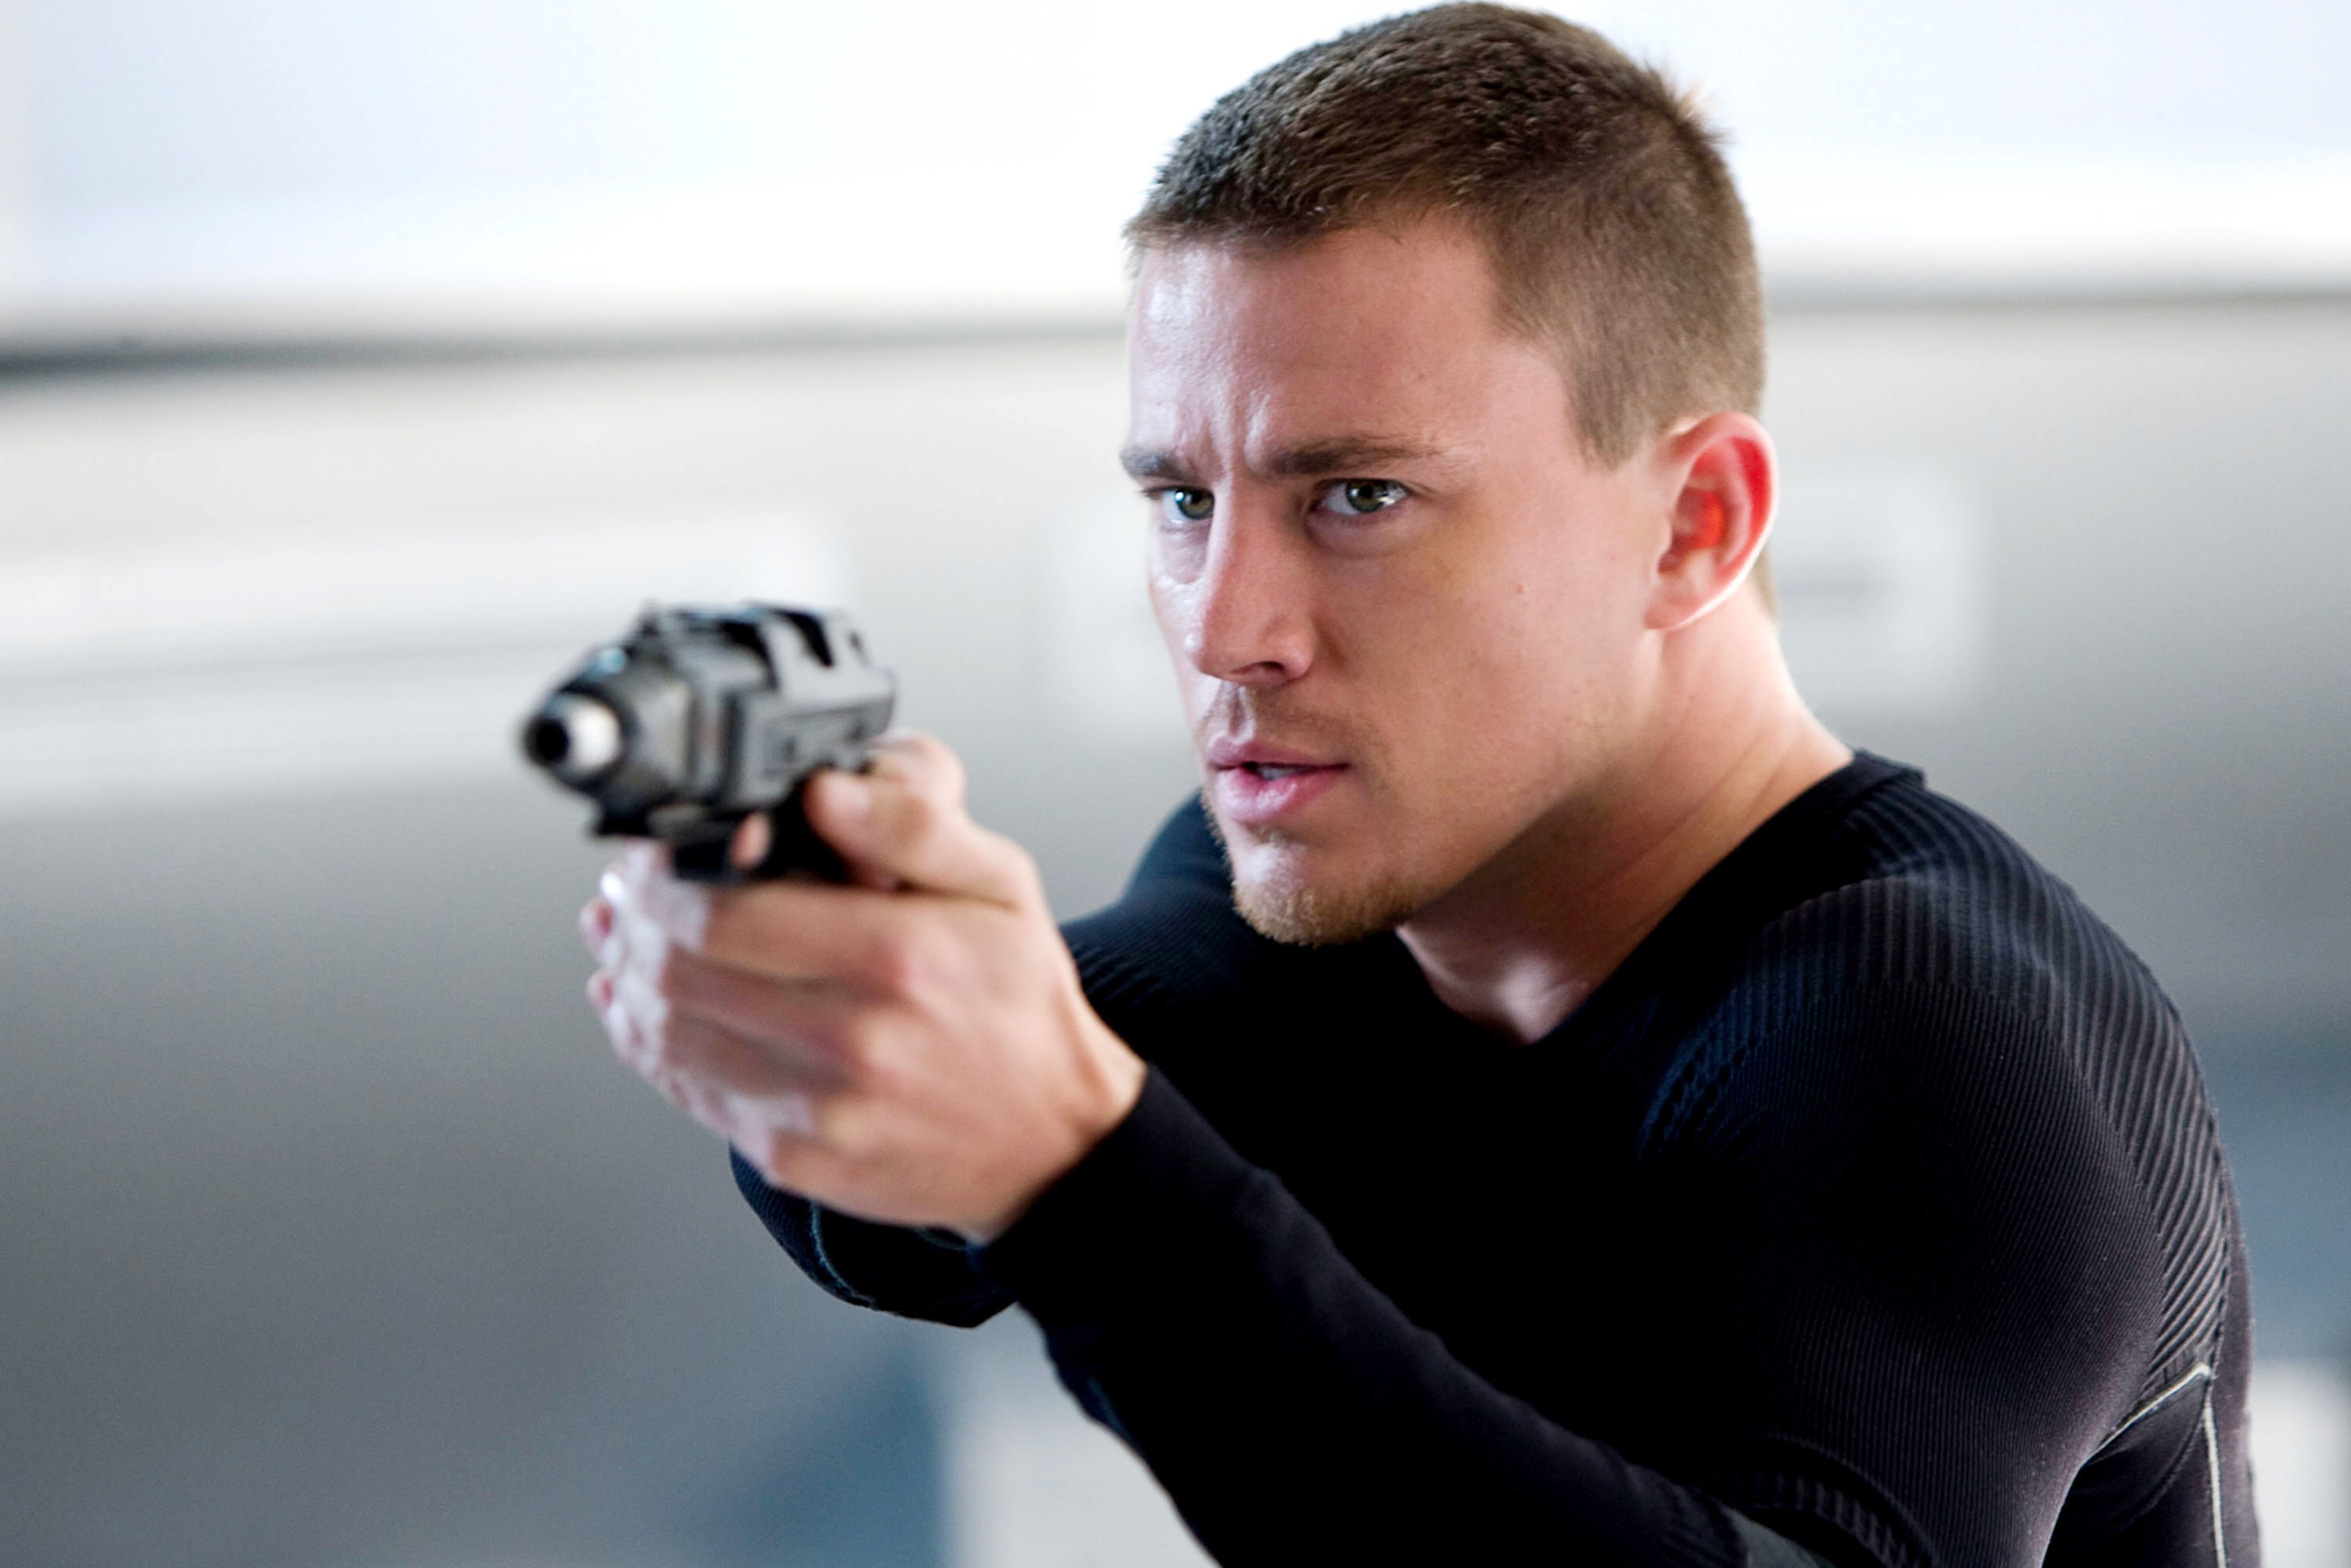 Channing holds a gun in the movie